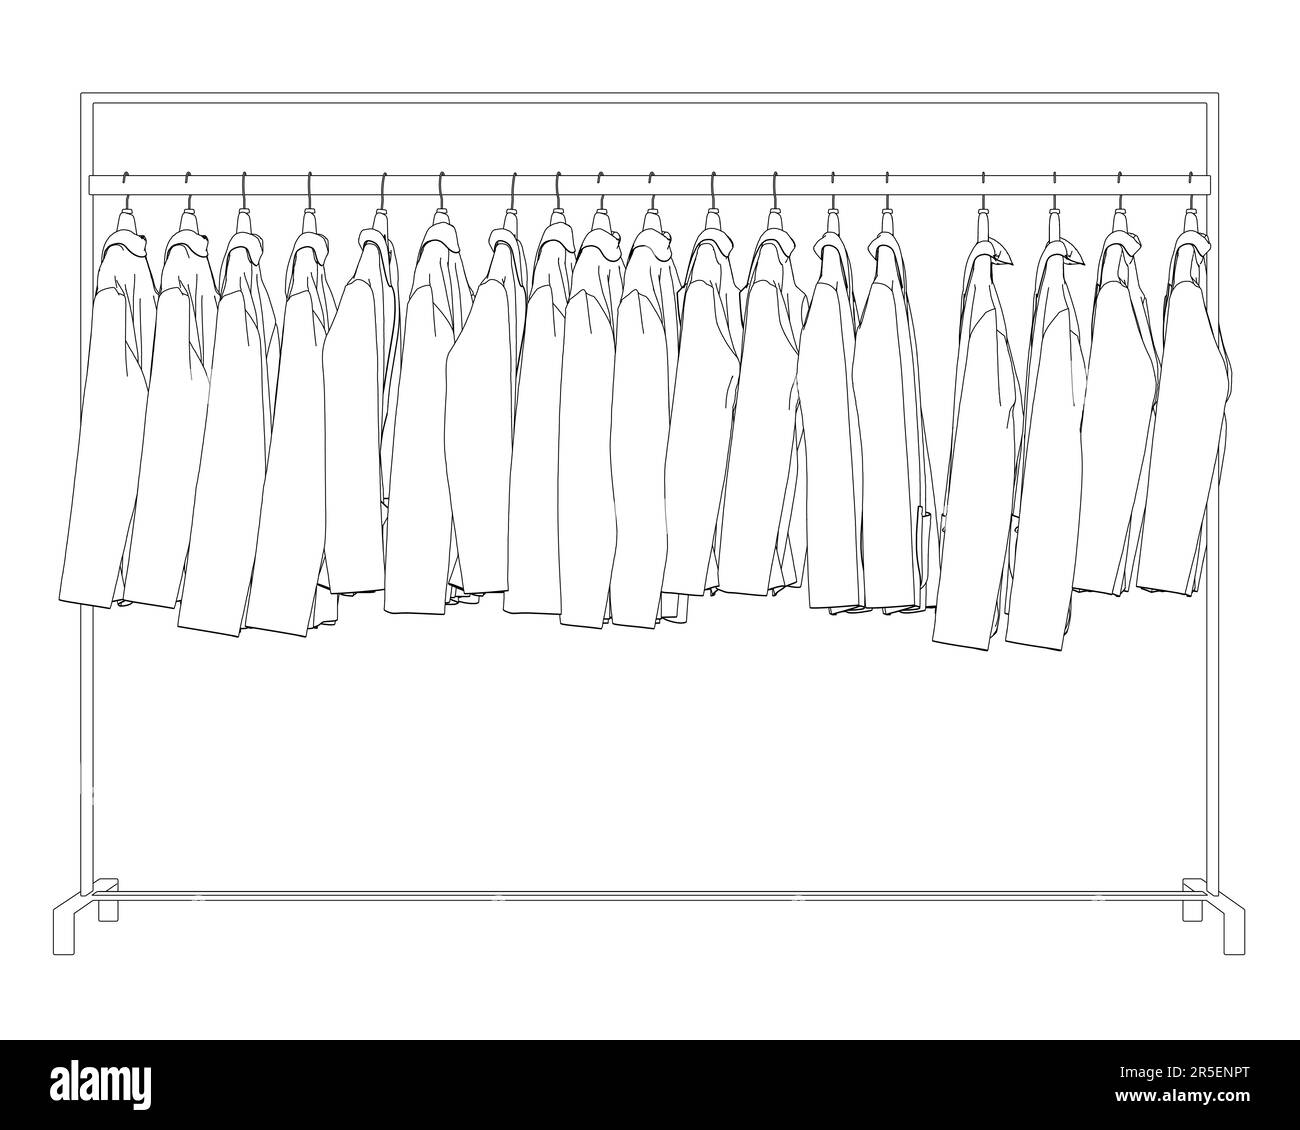 Shirt hanging on hook Black and White Stock Photos & Images - Alamy